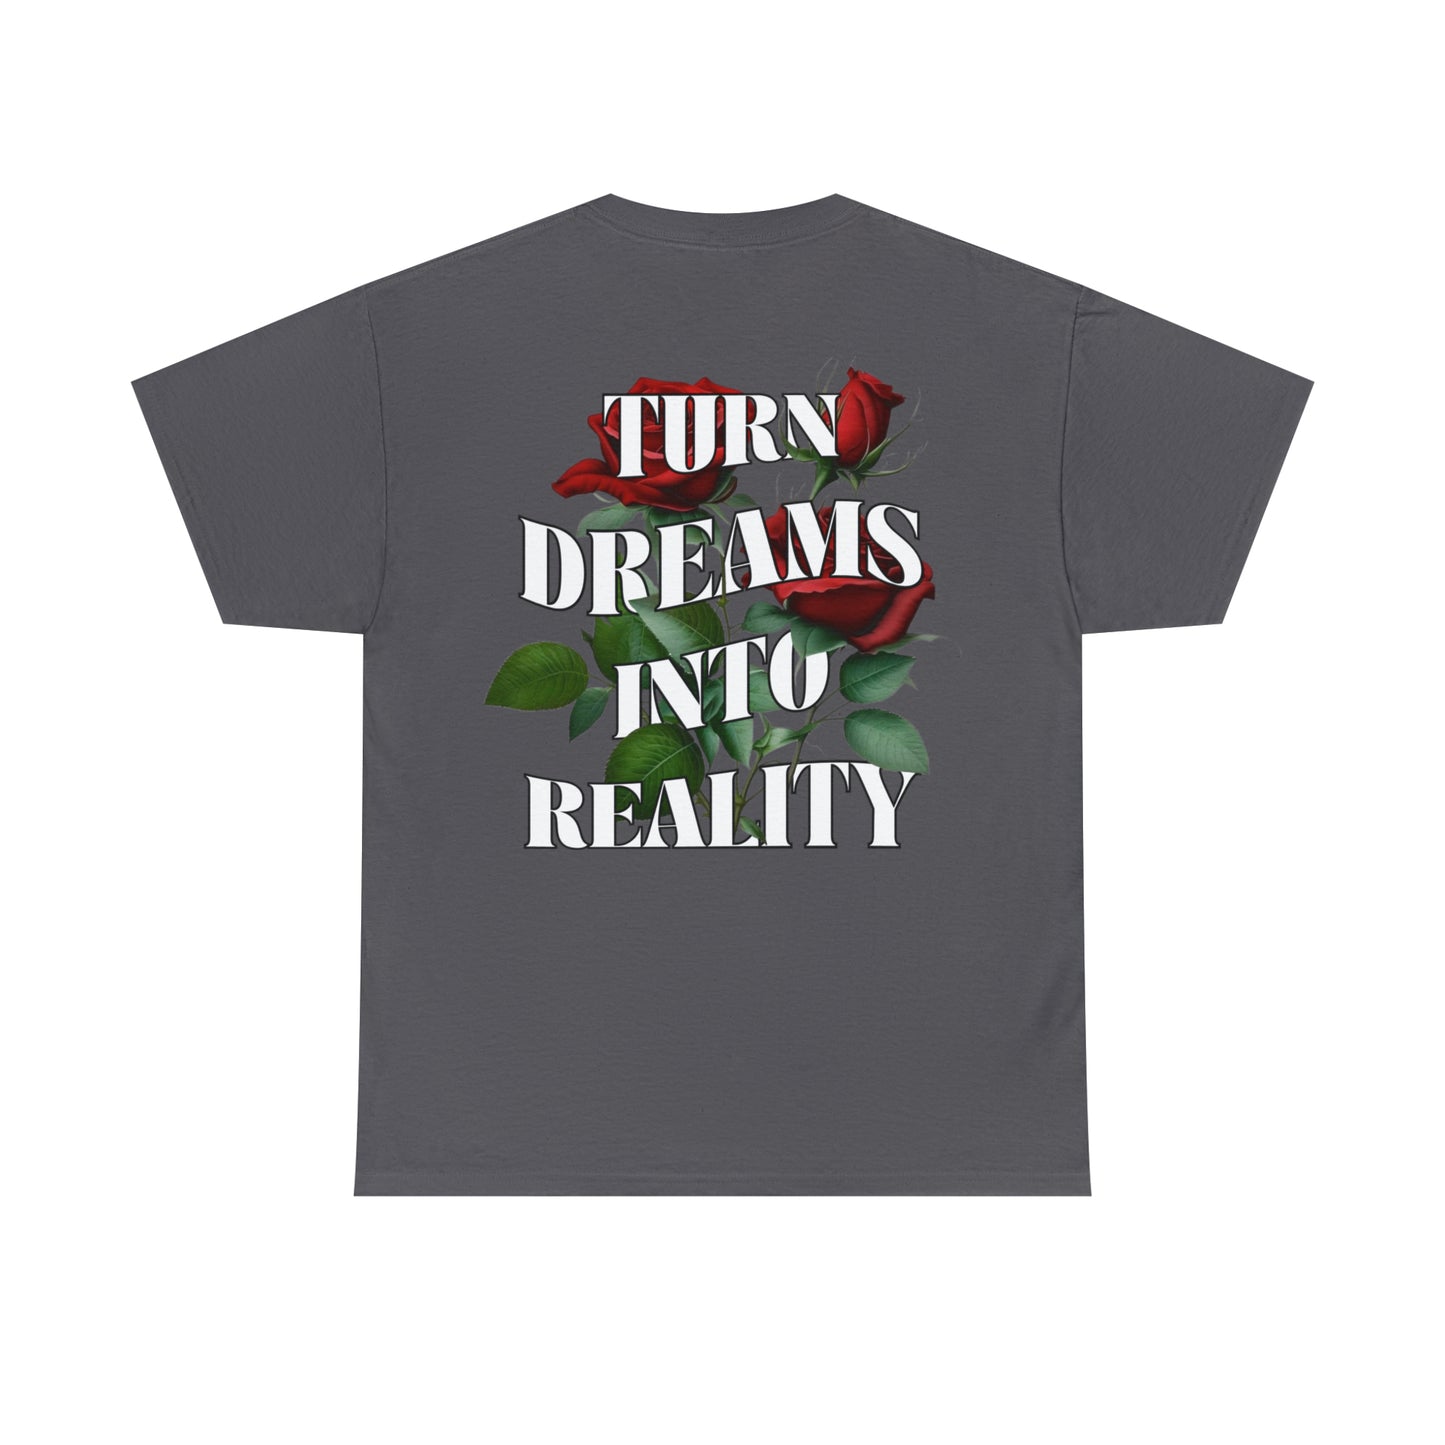 Dark Grey Graphic Tee With "Turn Dreams Into Reality" Quote with red roses in between the lettering